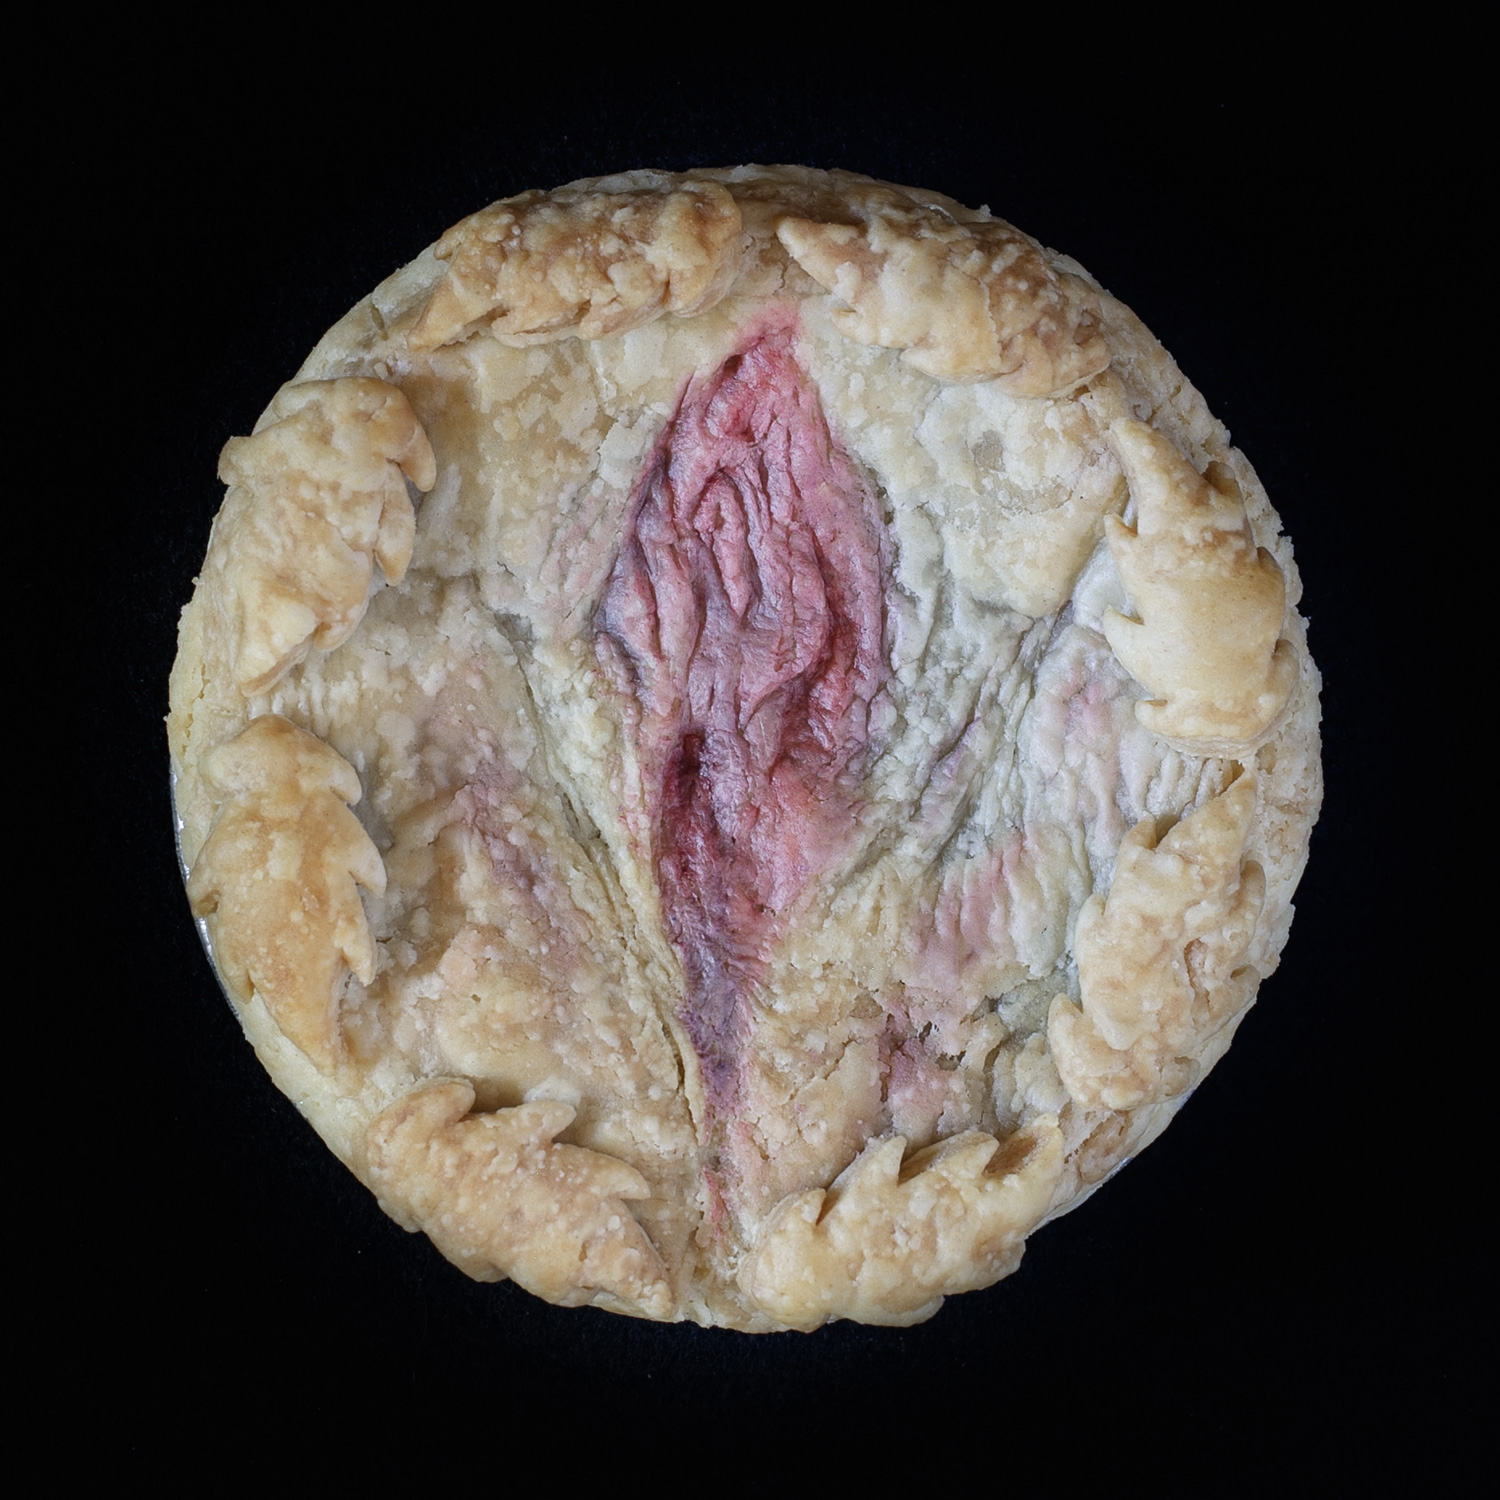 Hand sculpted vulva art on a real, baked cherry pie on a black background